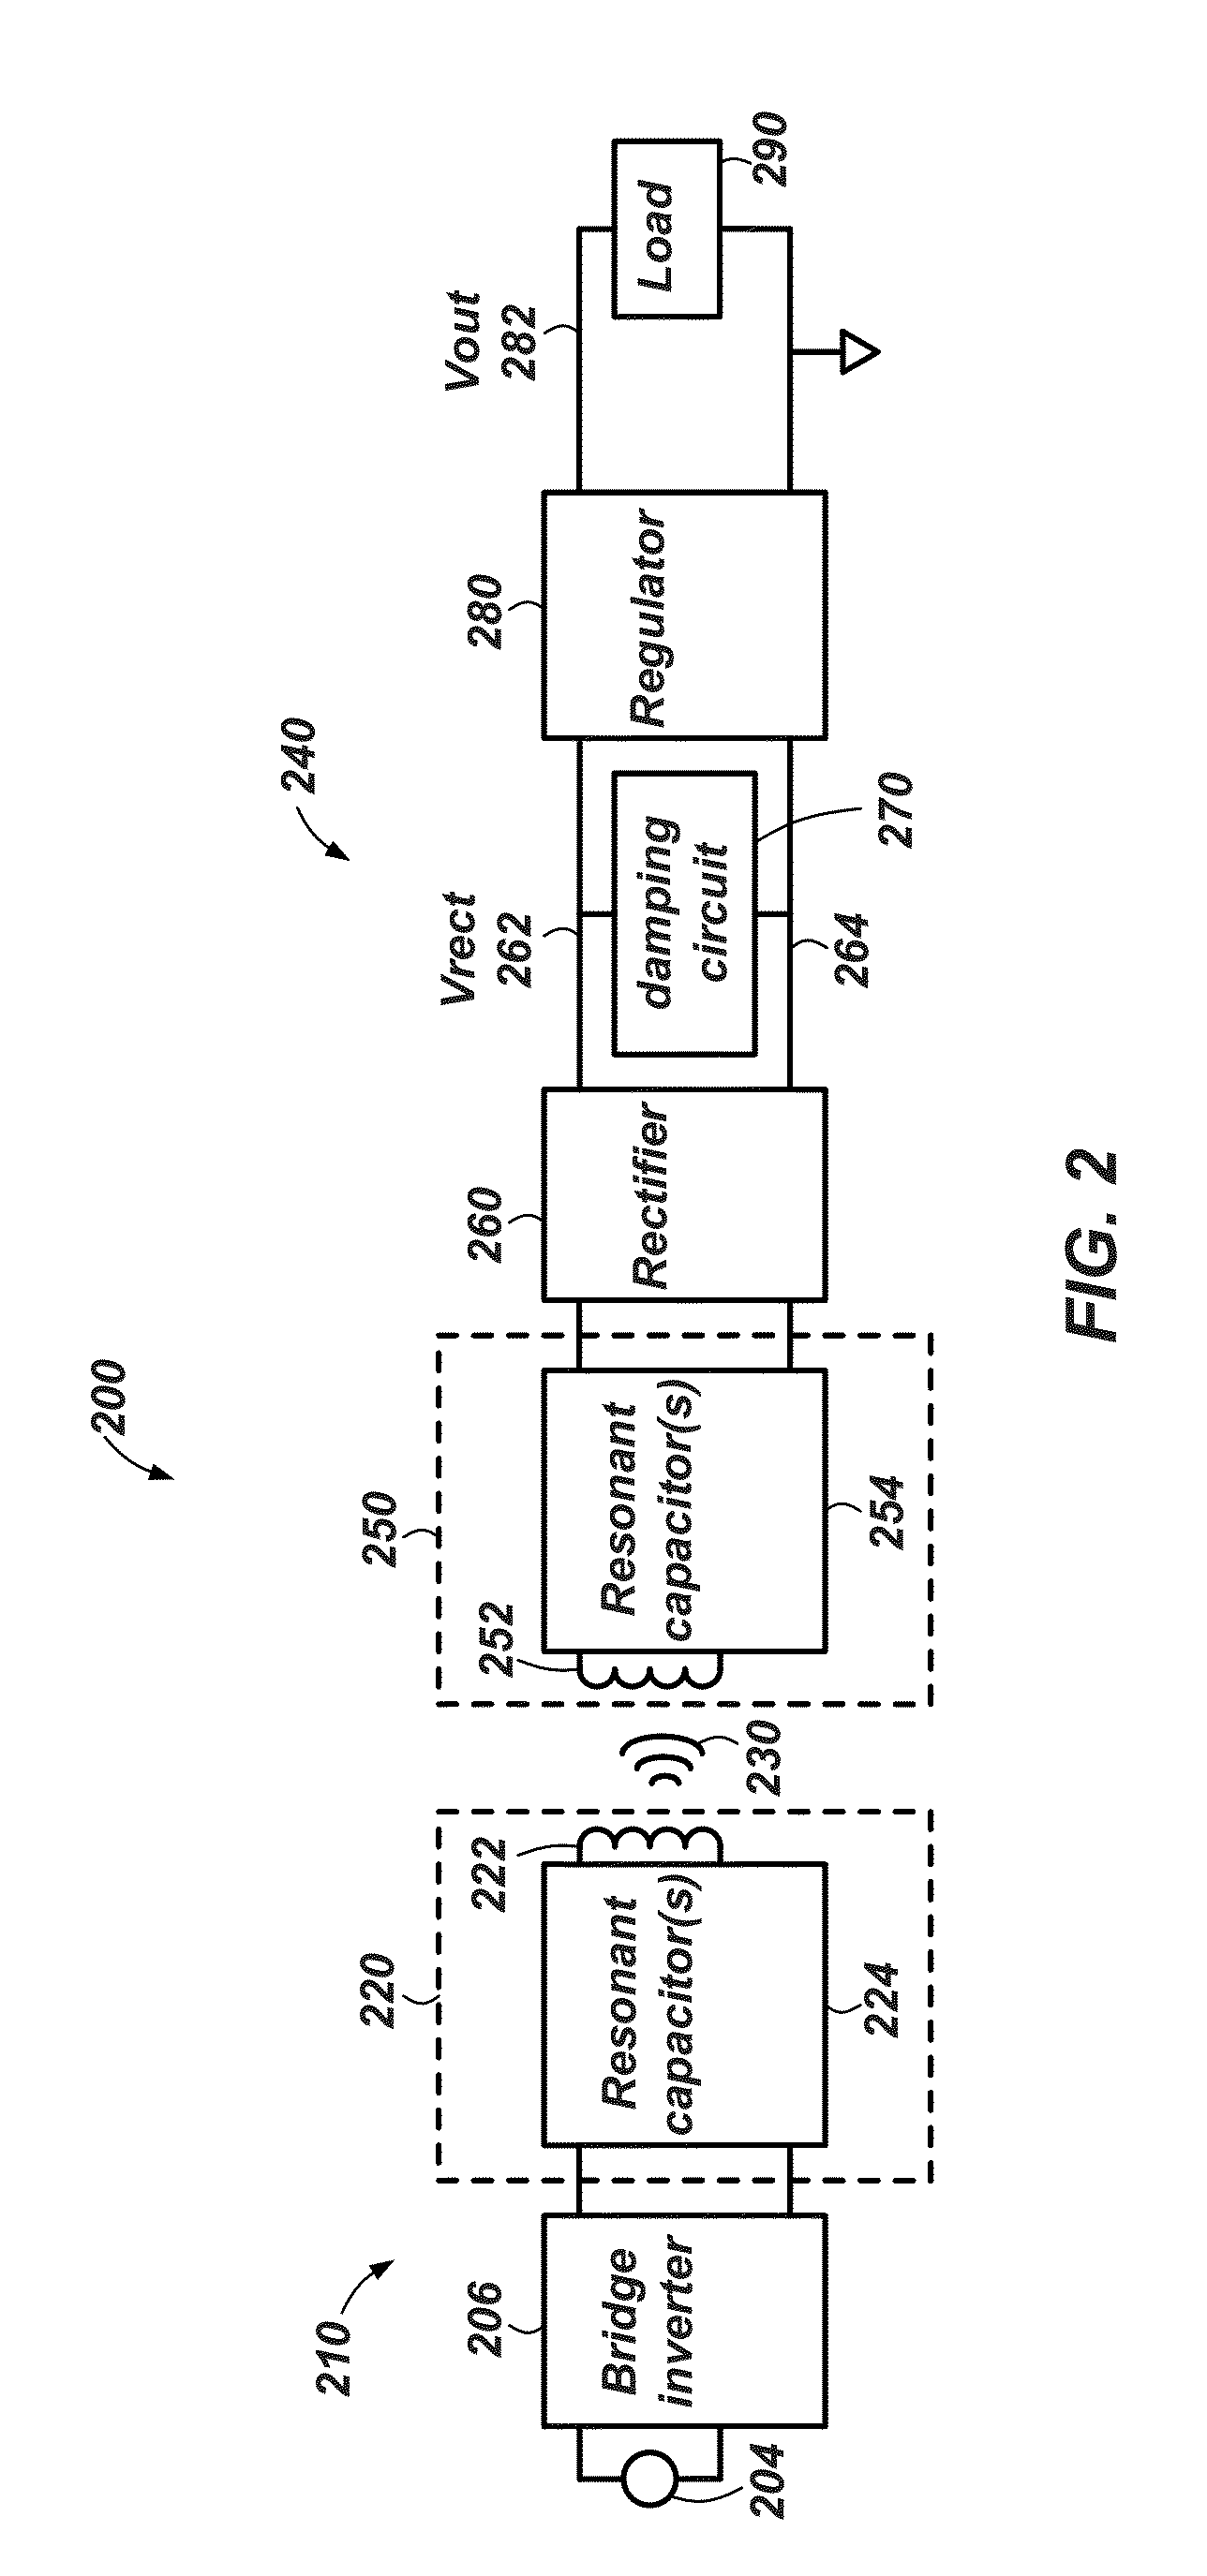 Suppression of audible harmonics in wireless power receivers